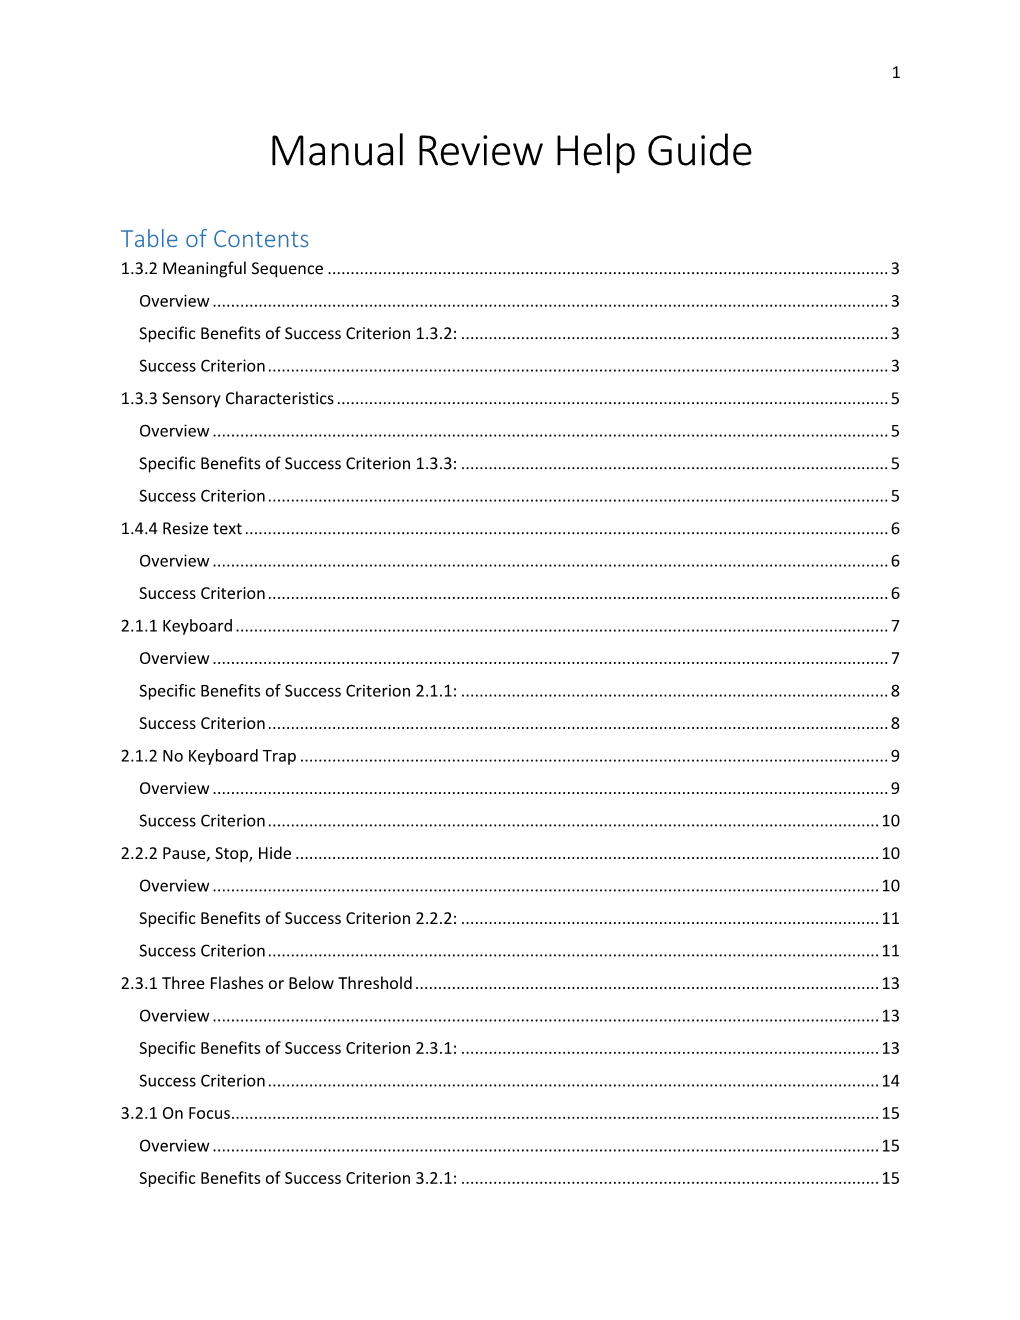 Manual Review Technical Help Guide (PDF, 718Kb)